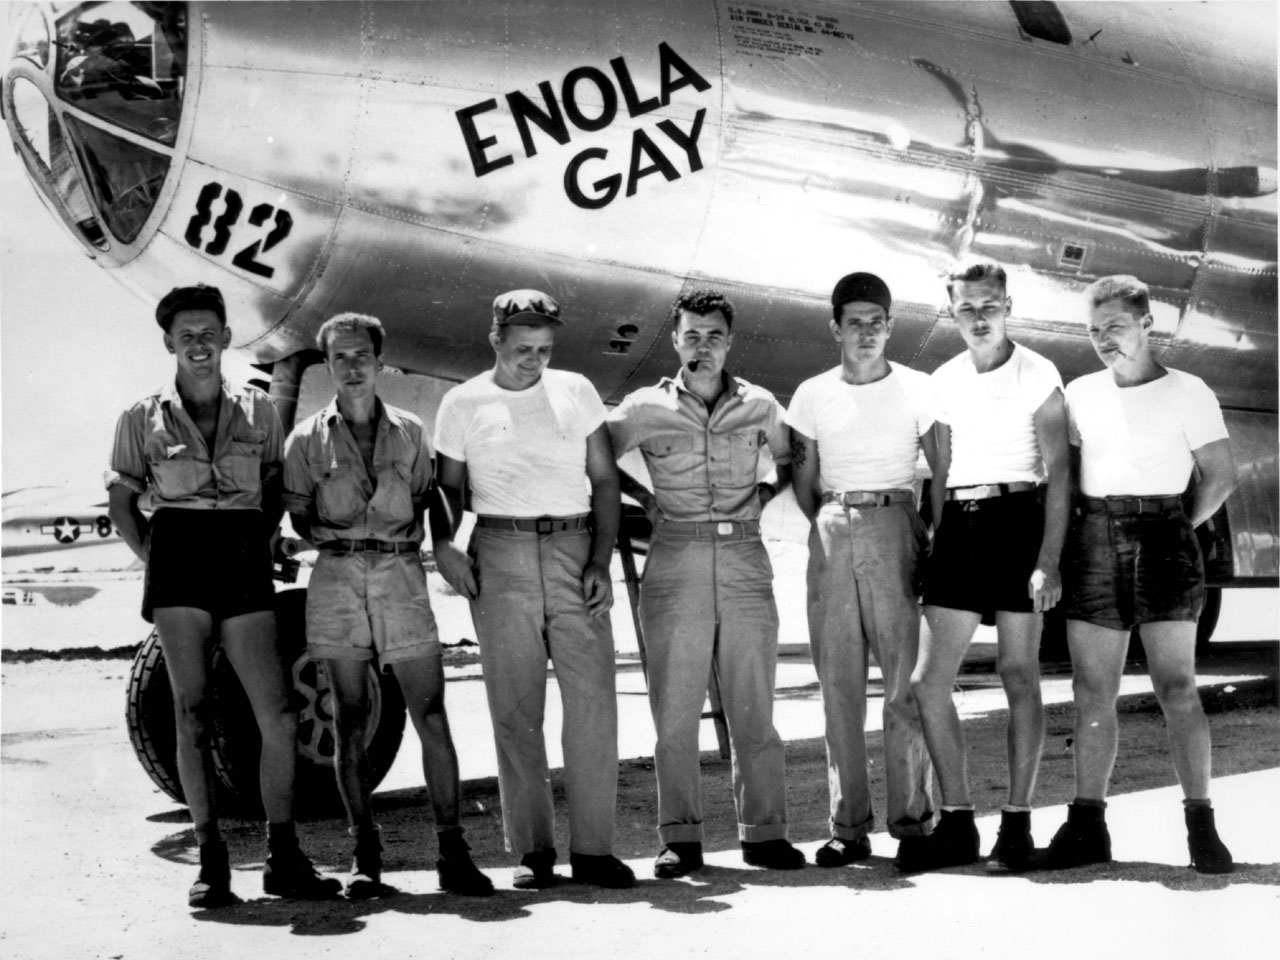 USAAF Colonel Paul Tibbets and his crew of B-29 Superfortress bomber 'Enola Gay', 5 Aug 1945